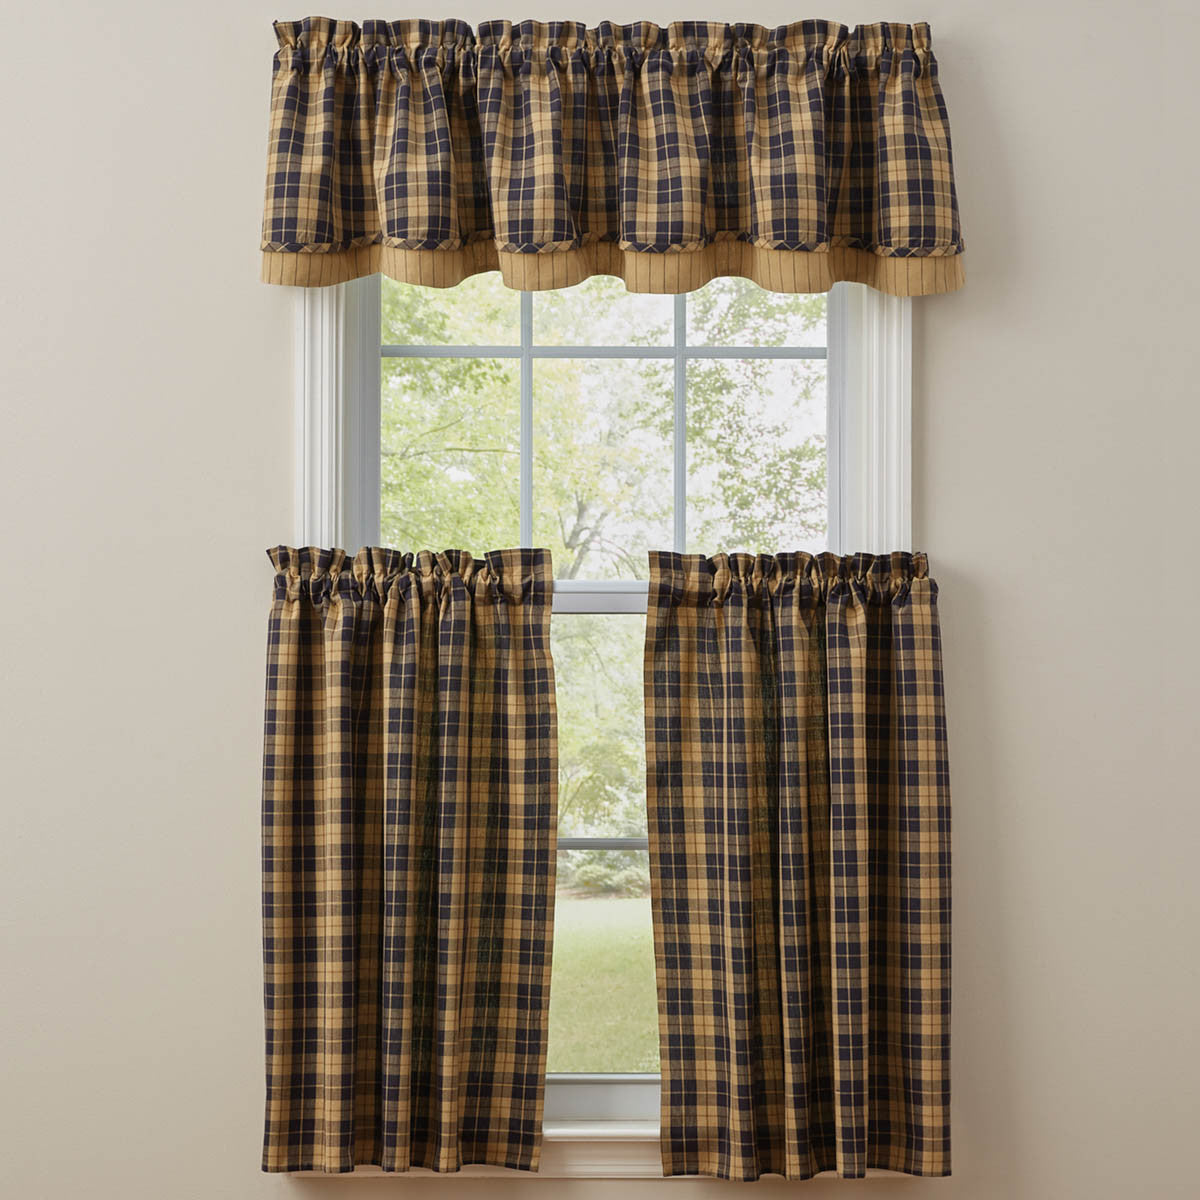 Pittsfield Valance Set of 4 - Lined Layered Park Designs